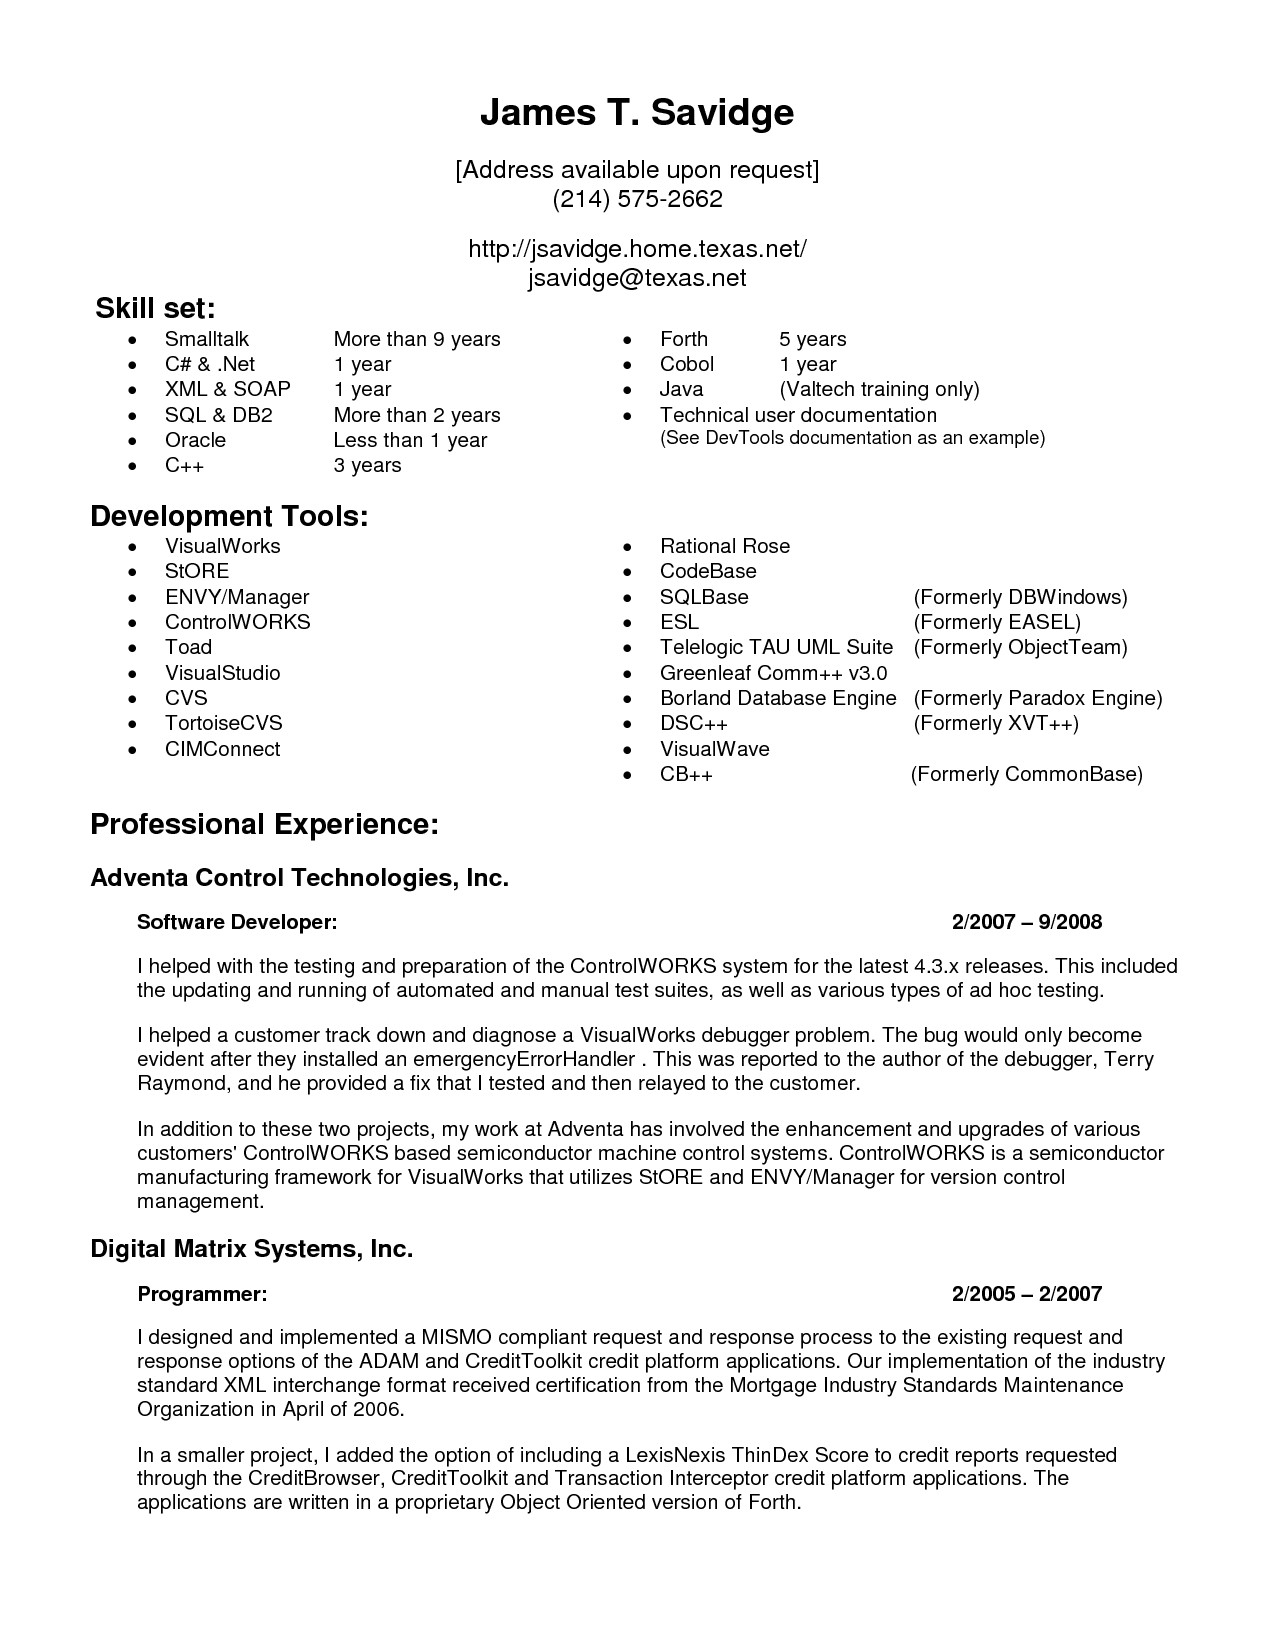 Sample Resume for Manual Testing with 1 Year Experience top Rated Manual Testing Resume Sample for 1 Year